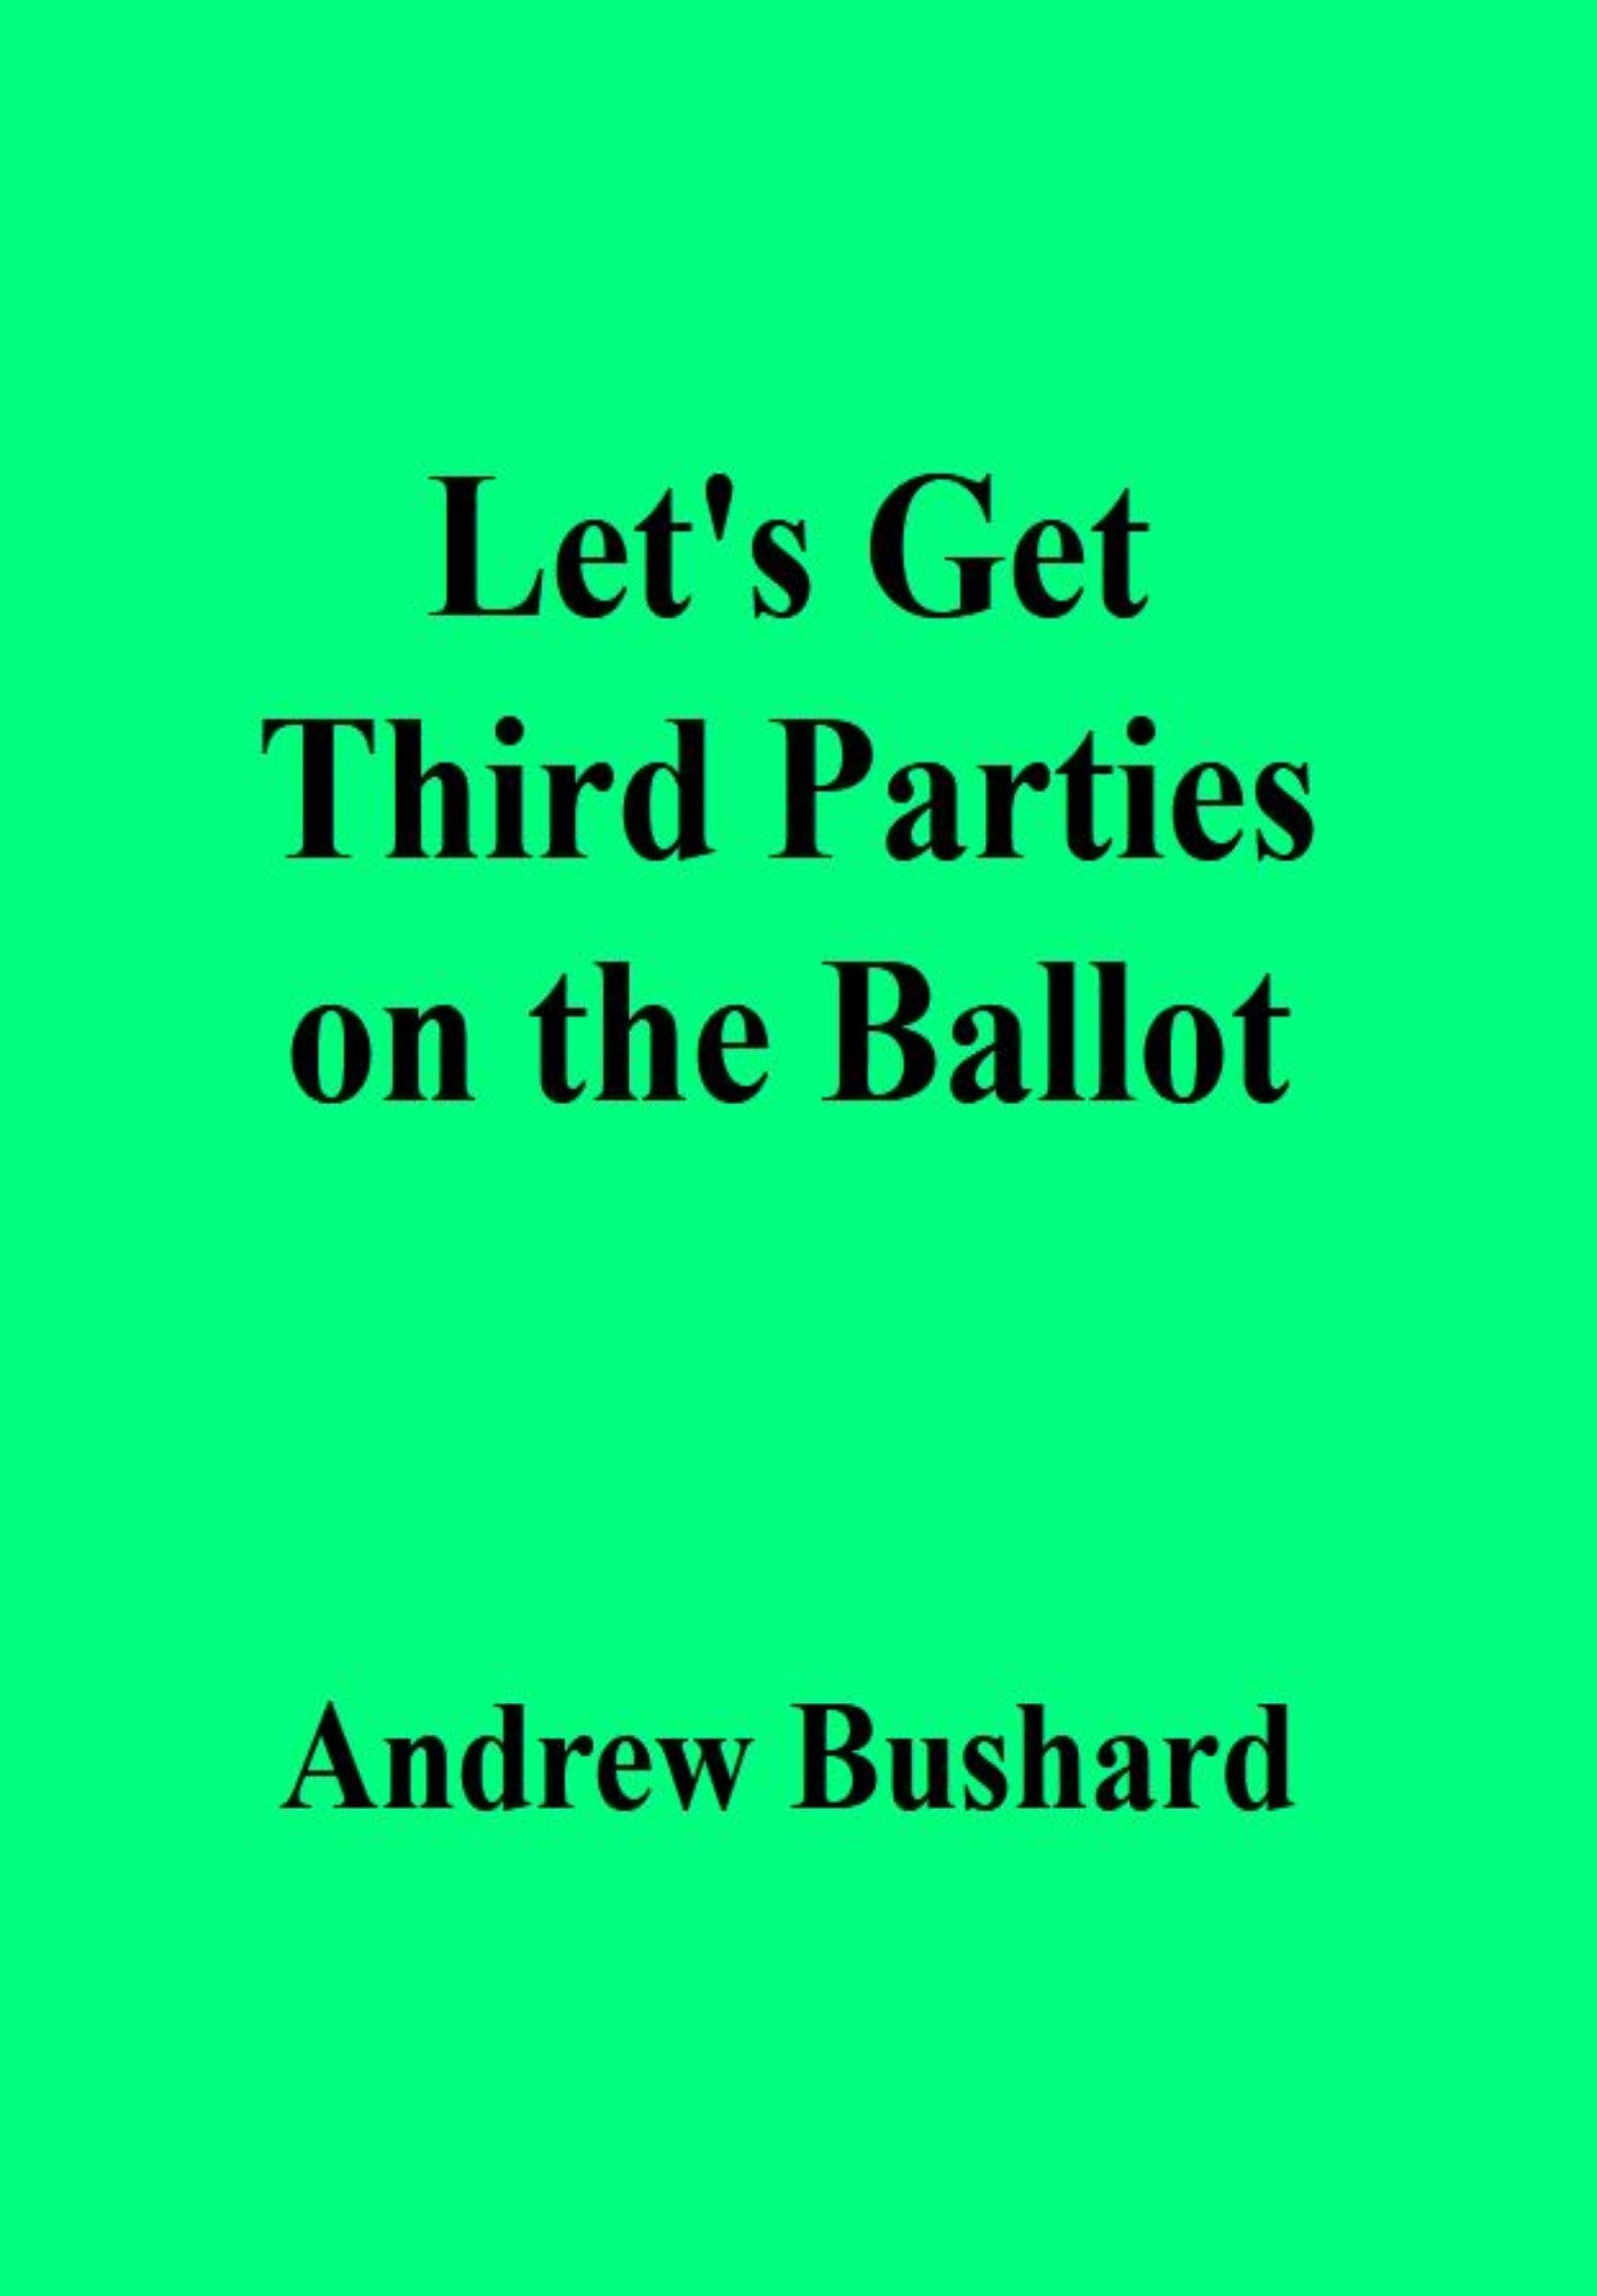 Let's Get Third Parties on the Ballot's featured image